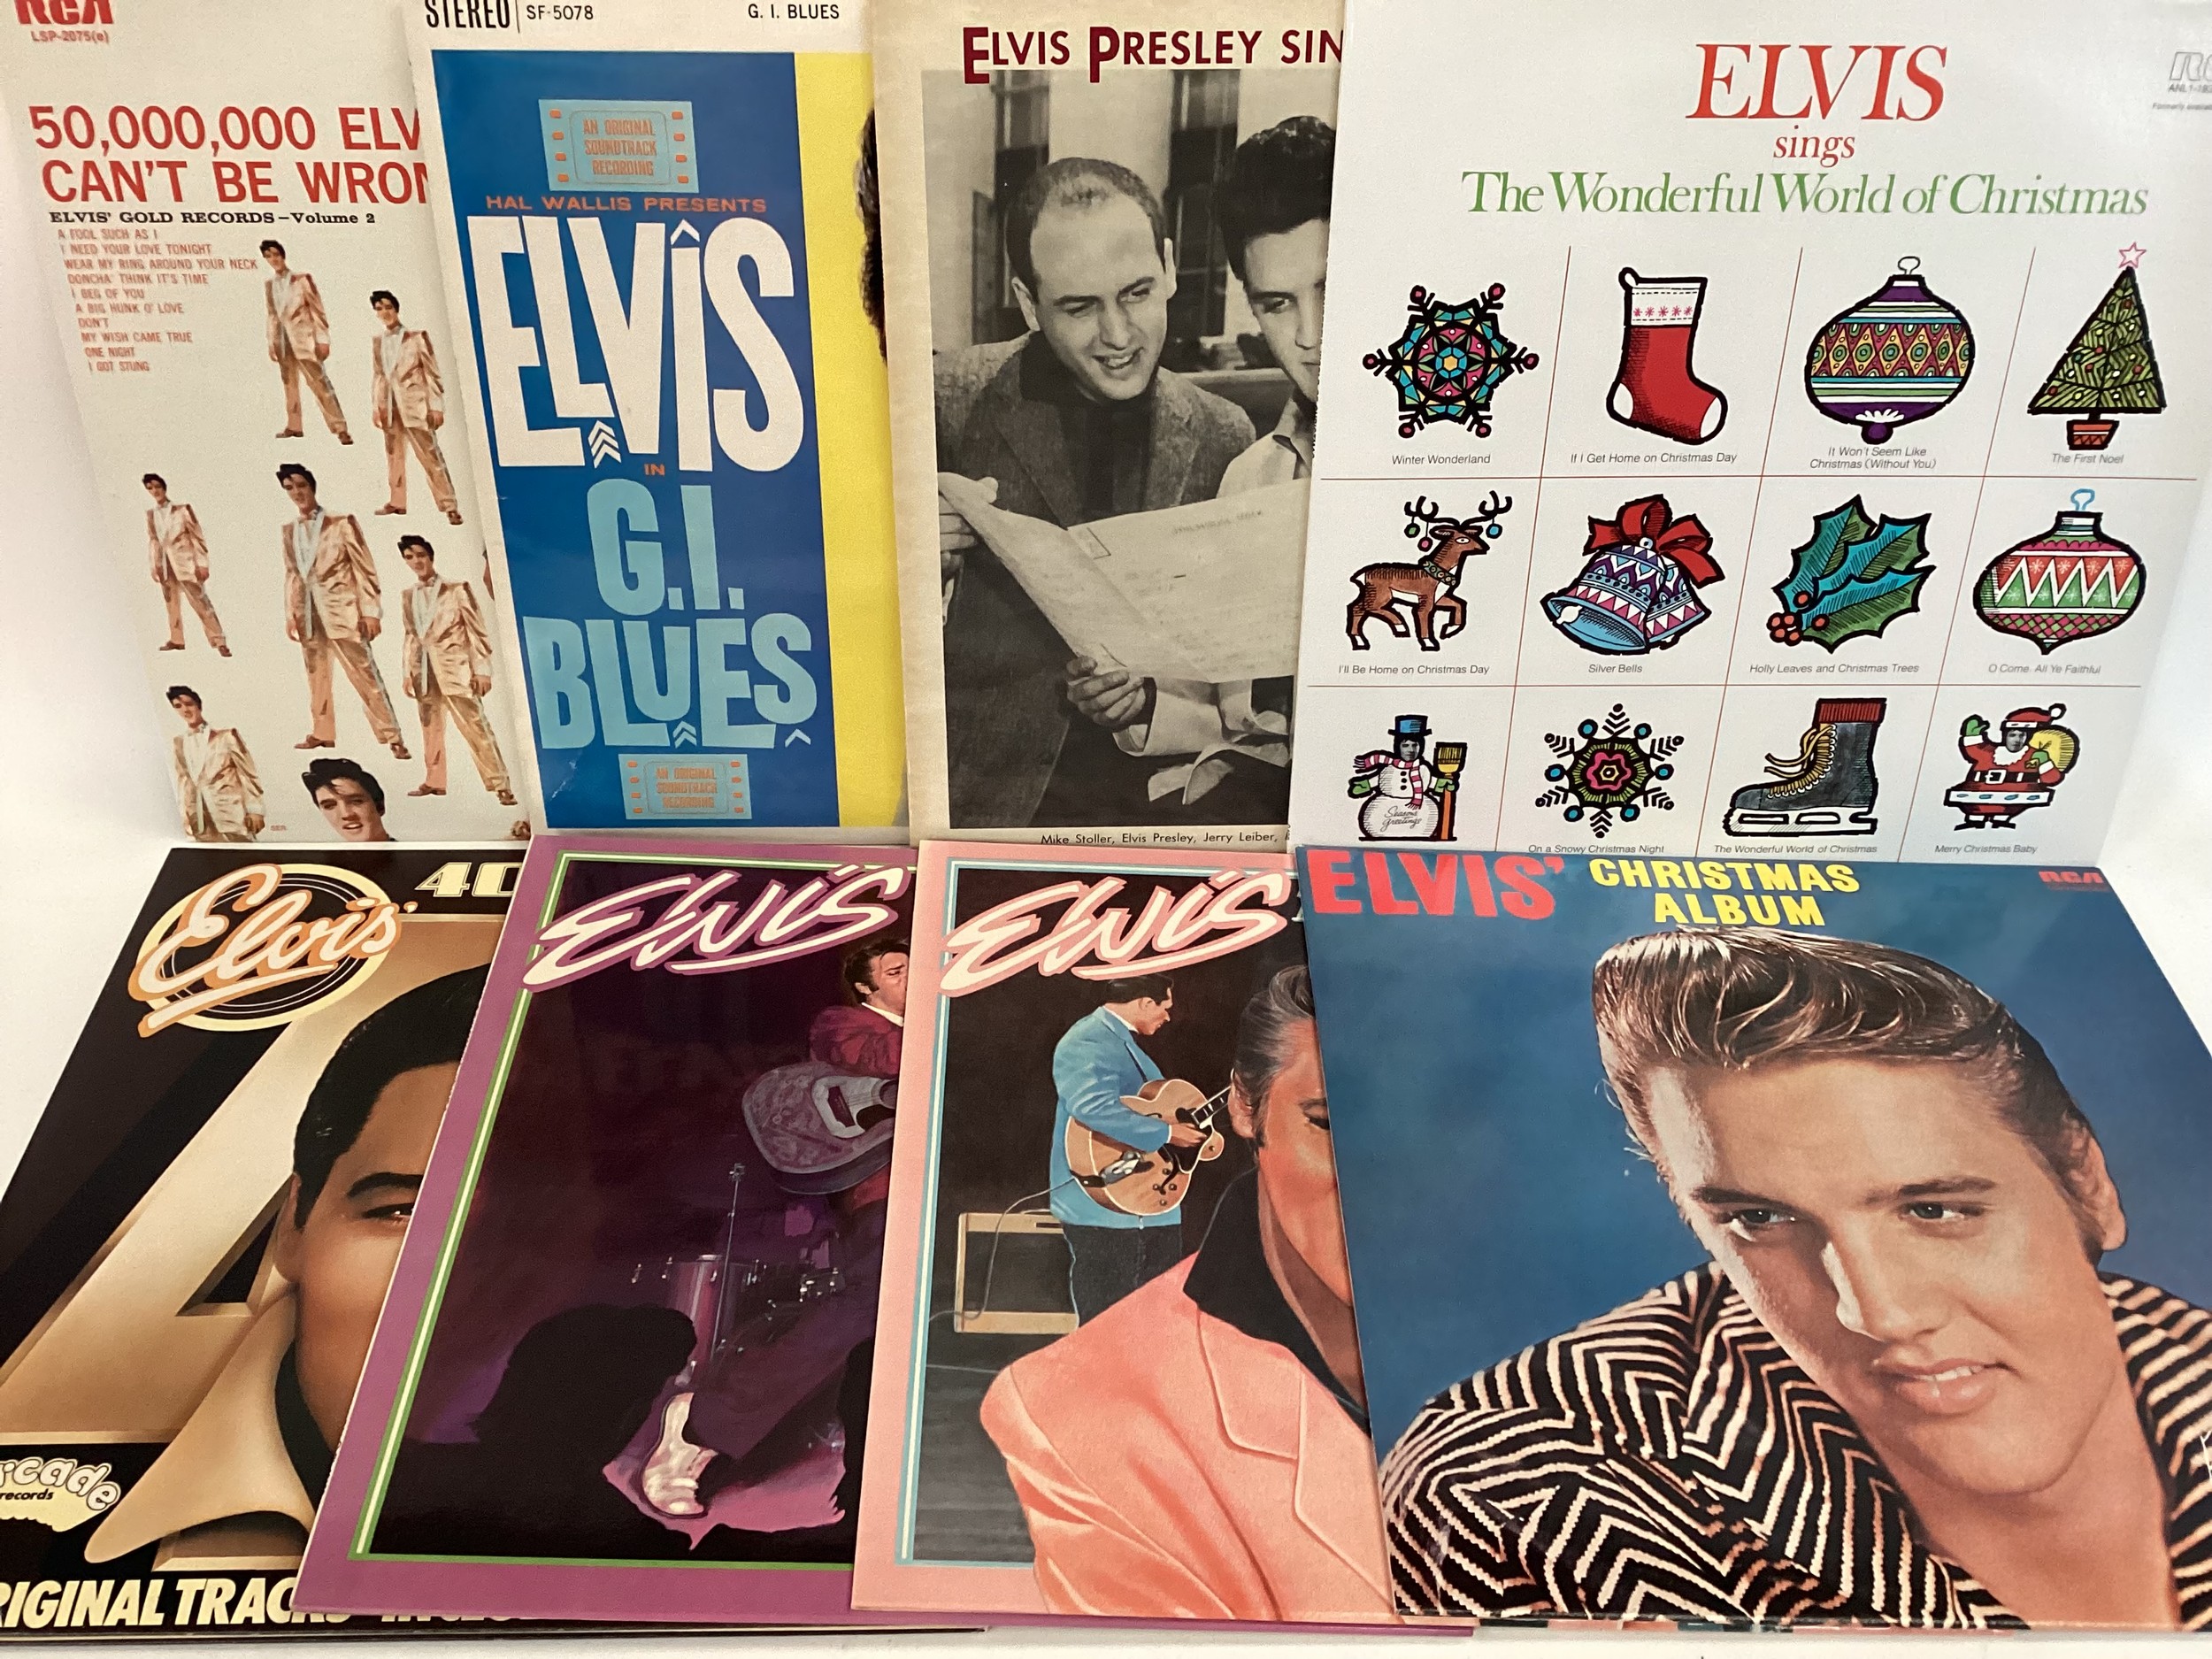 COLLECTION OF ELVIS PRESLEY VINYL LP RECORDS. This selection includes soundtrack and hit albums - Image 3 of 4